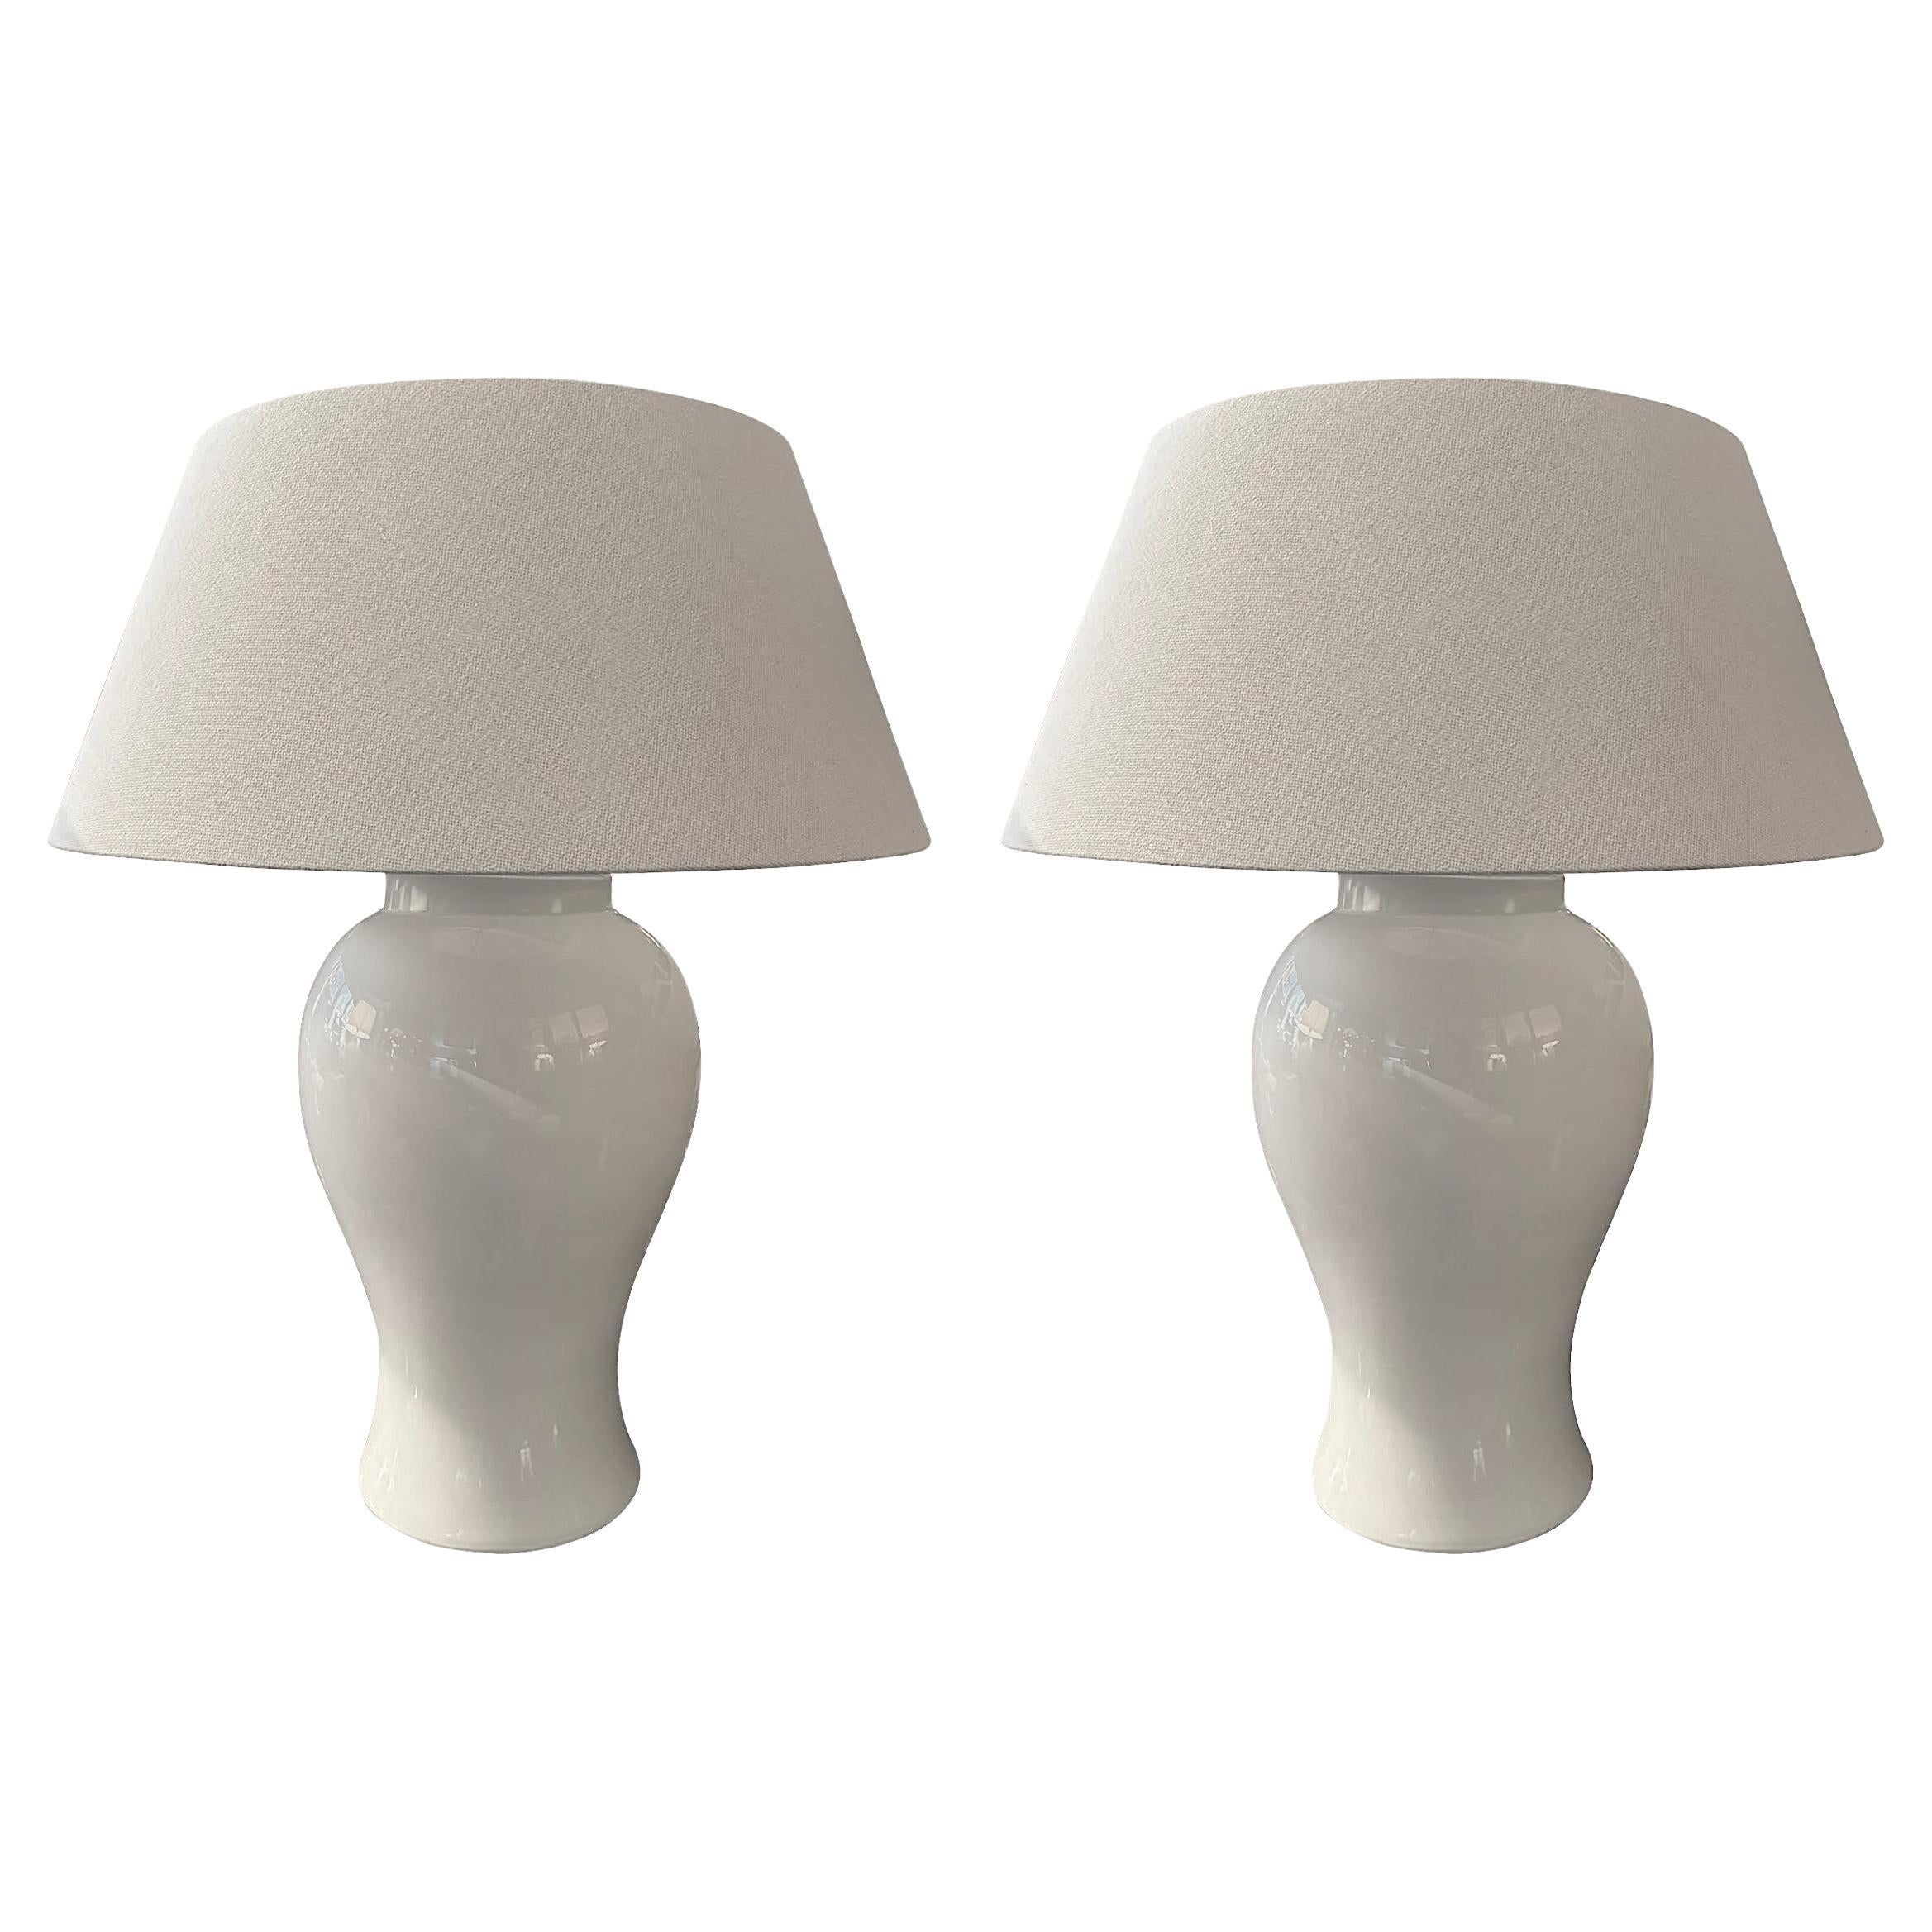 White Extra Large Classic Shaped Pair Of Lamps, China, Contemporary For Sale